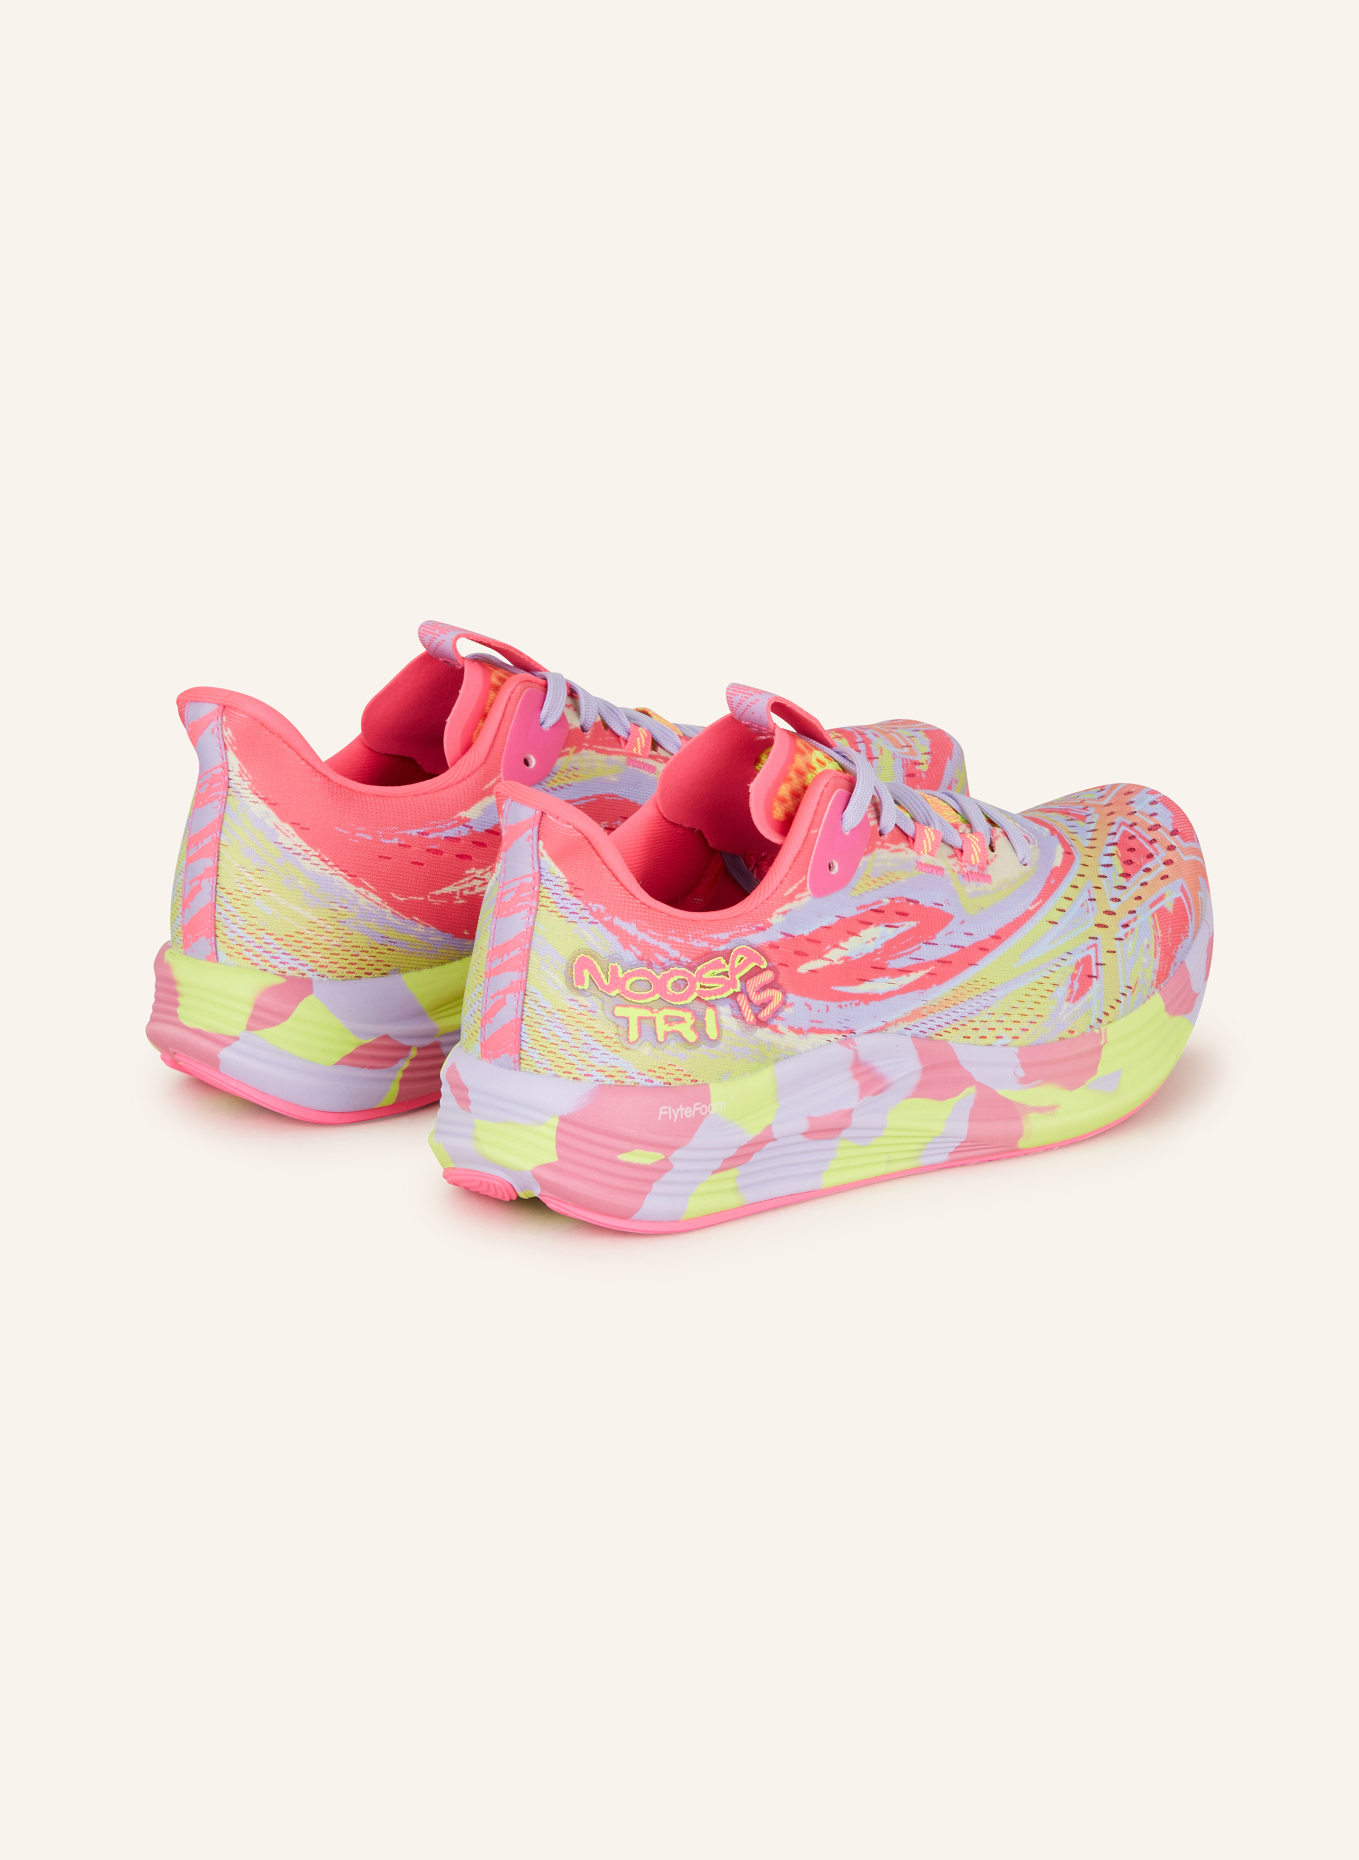 ASICS Running shoes NOOSA TRI™ 15, Color: NEON PINK/ LIGHT PURPLE/ NEON YELLOW (Image 2)